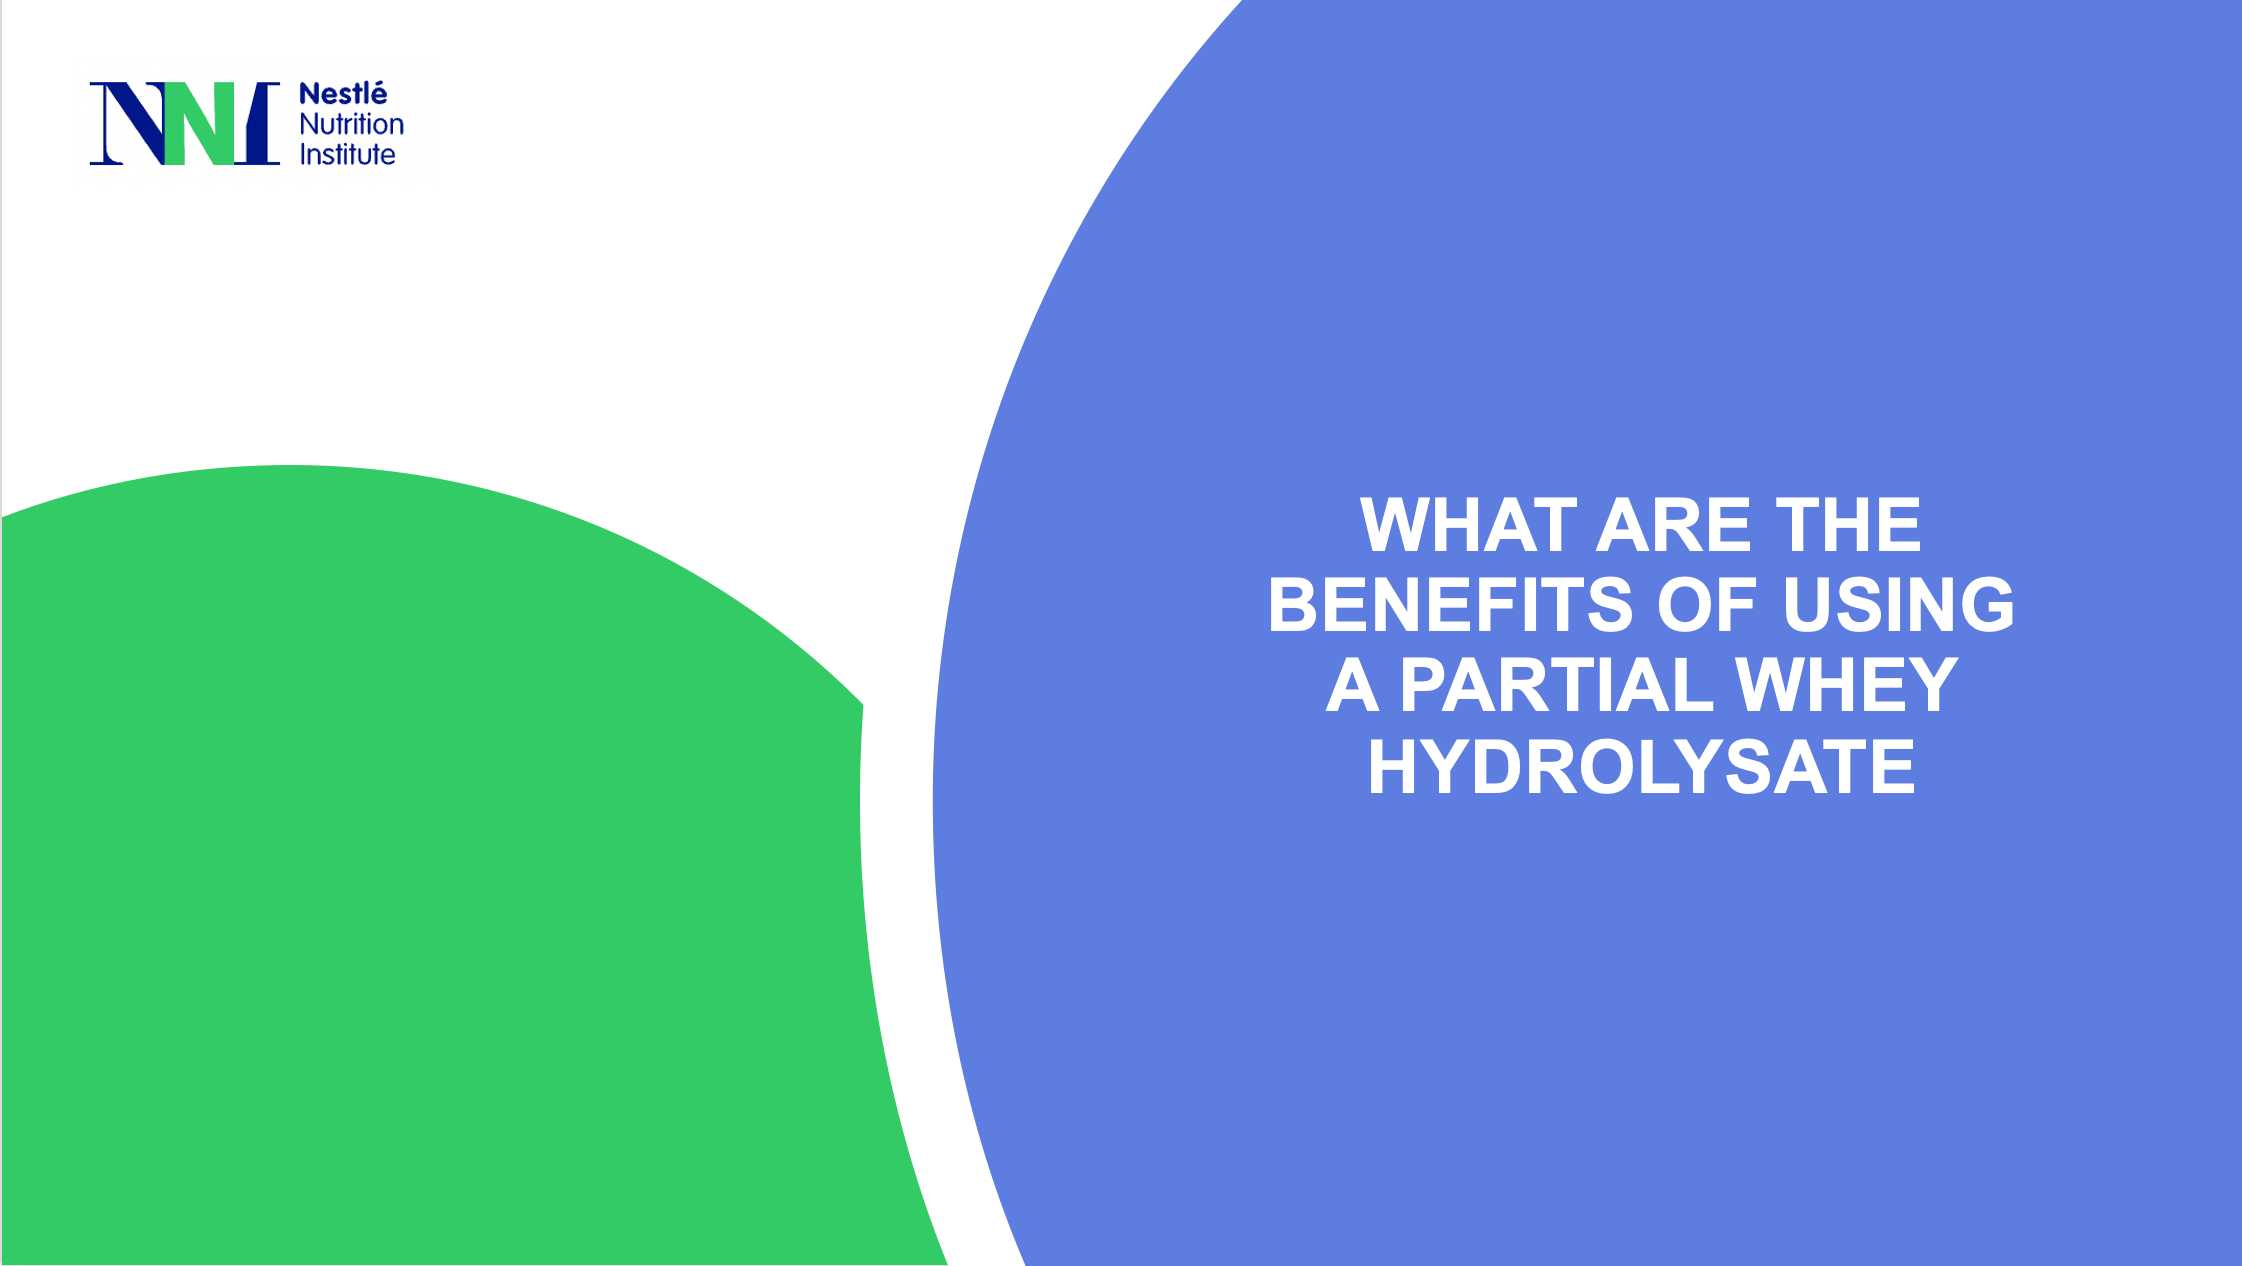 What Are The Benefits of Using a Partial Whey Hydrolysate